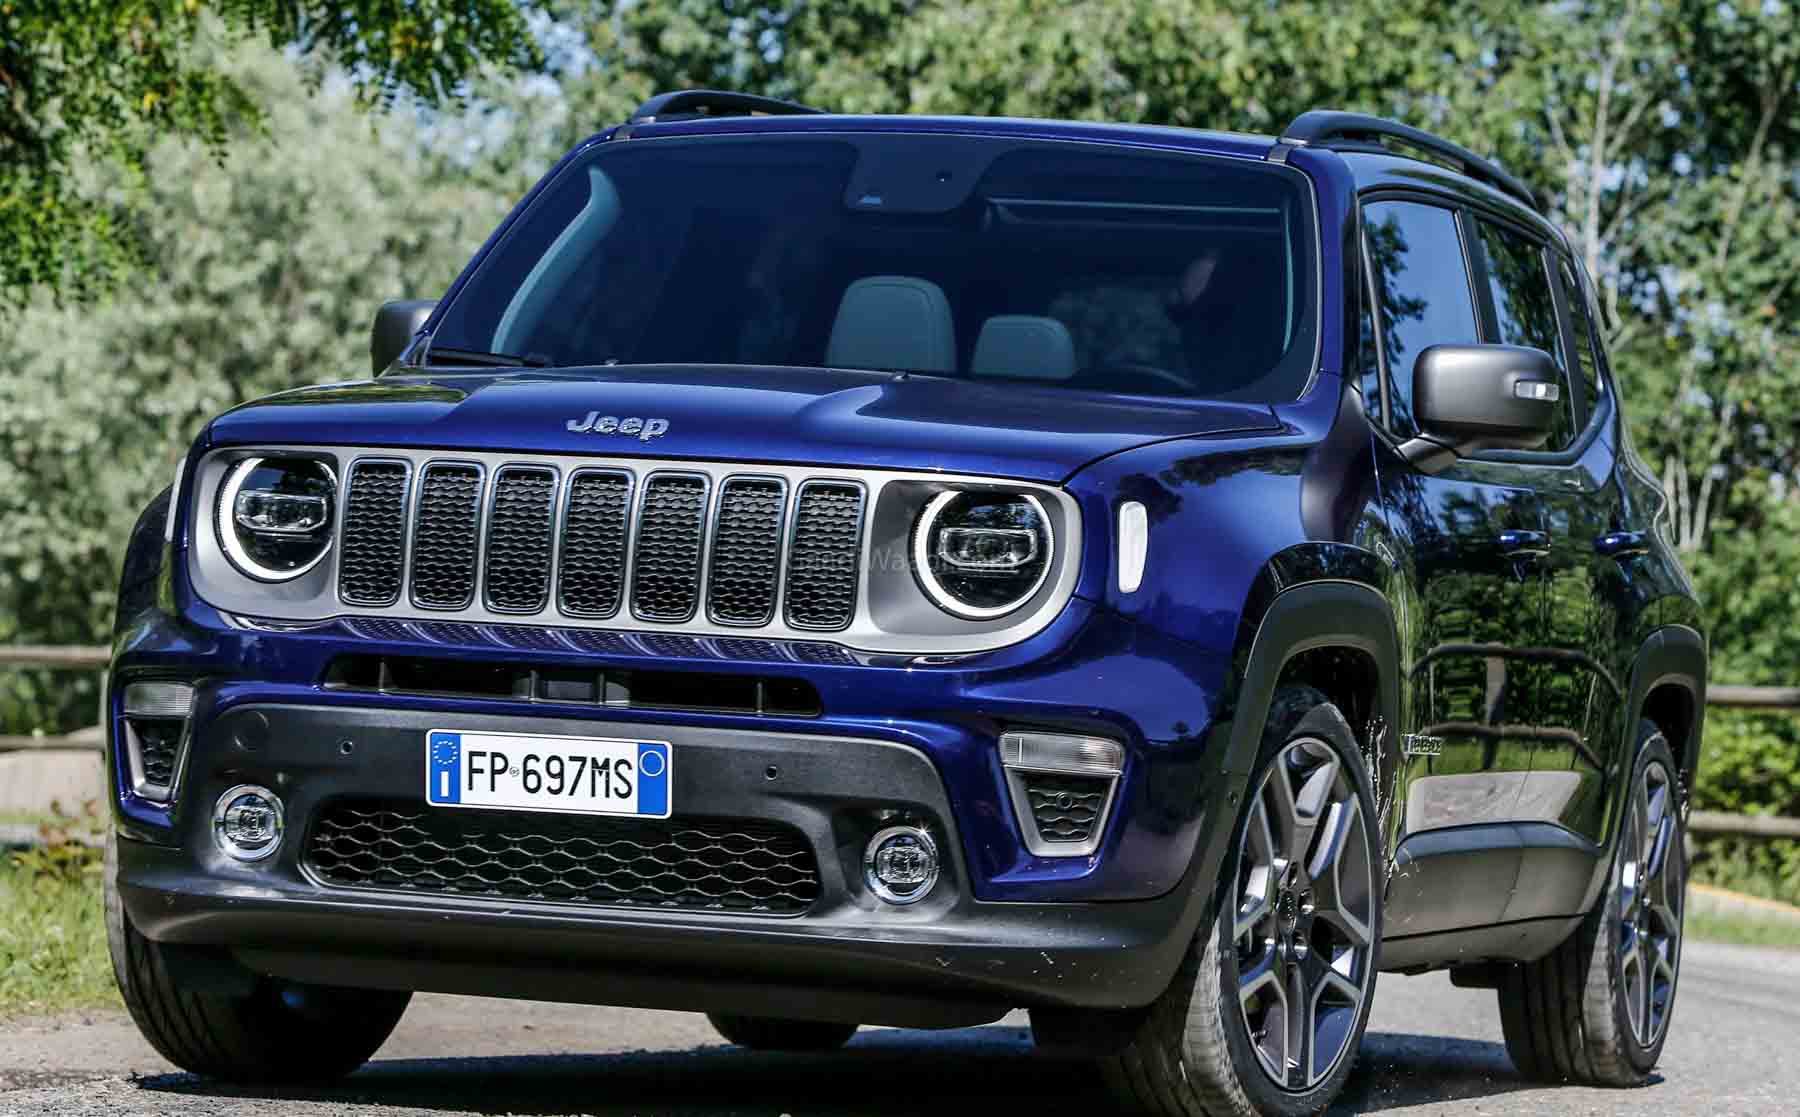 List of Top Jeep Car Models in India